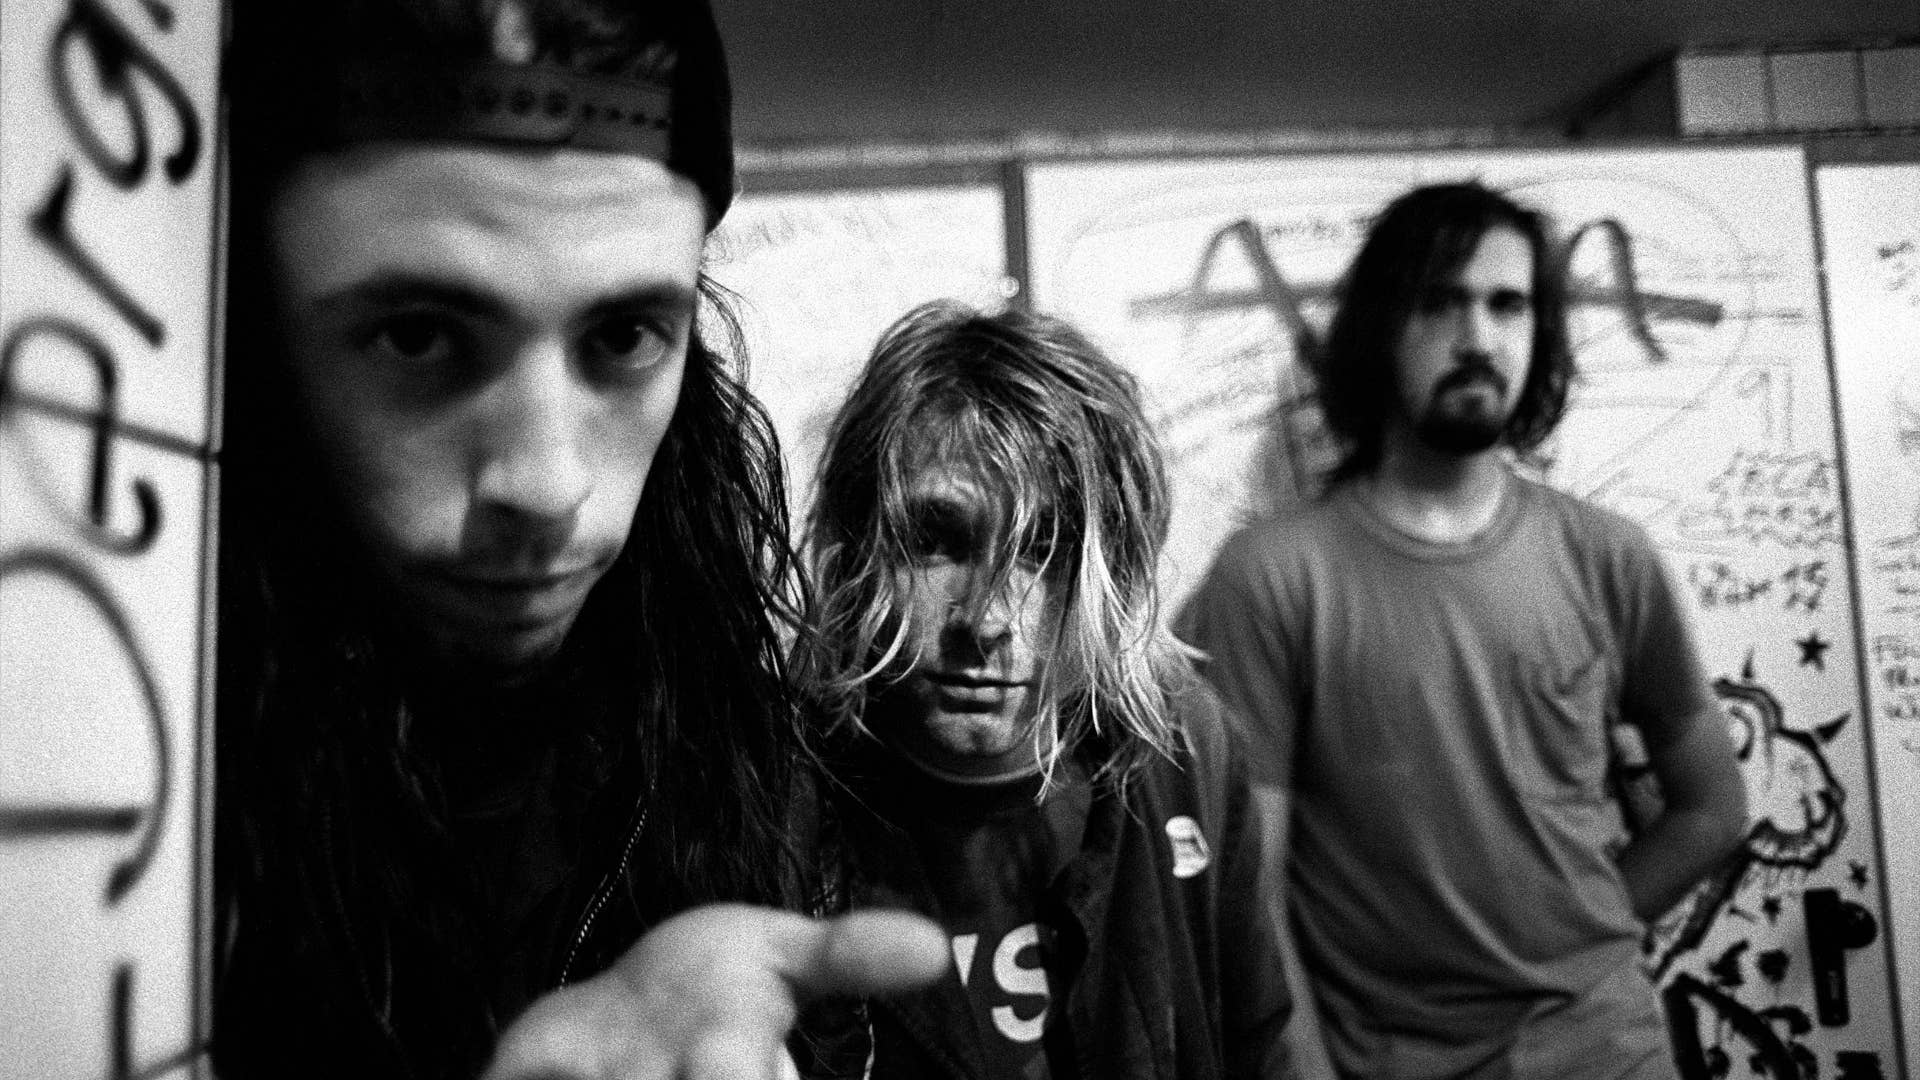 Nirvana posed together for a photo in Frankfurt on 1991.